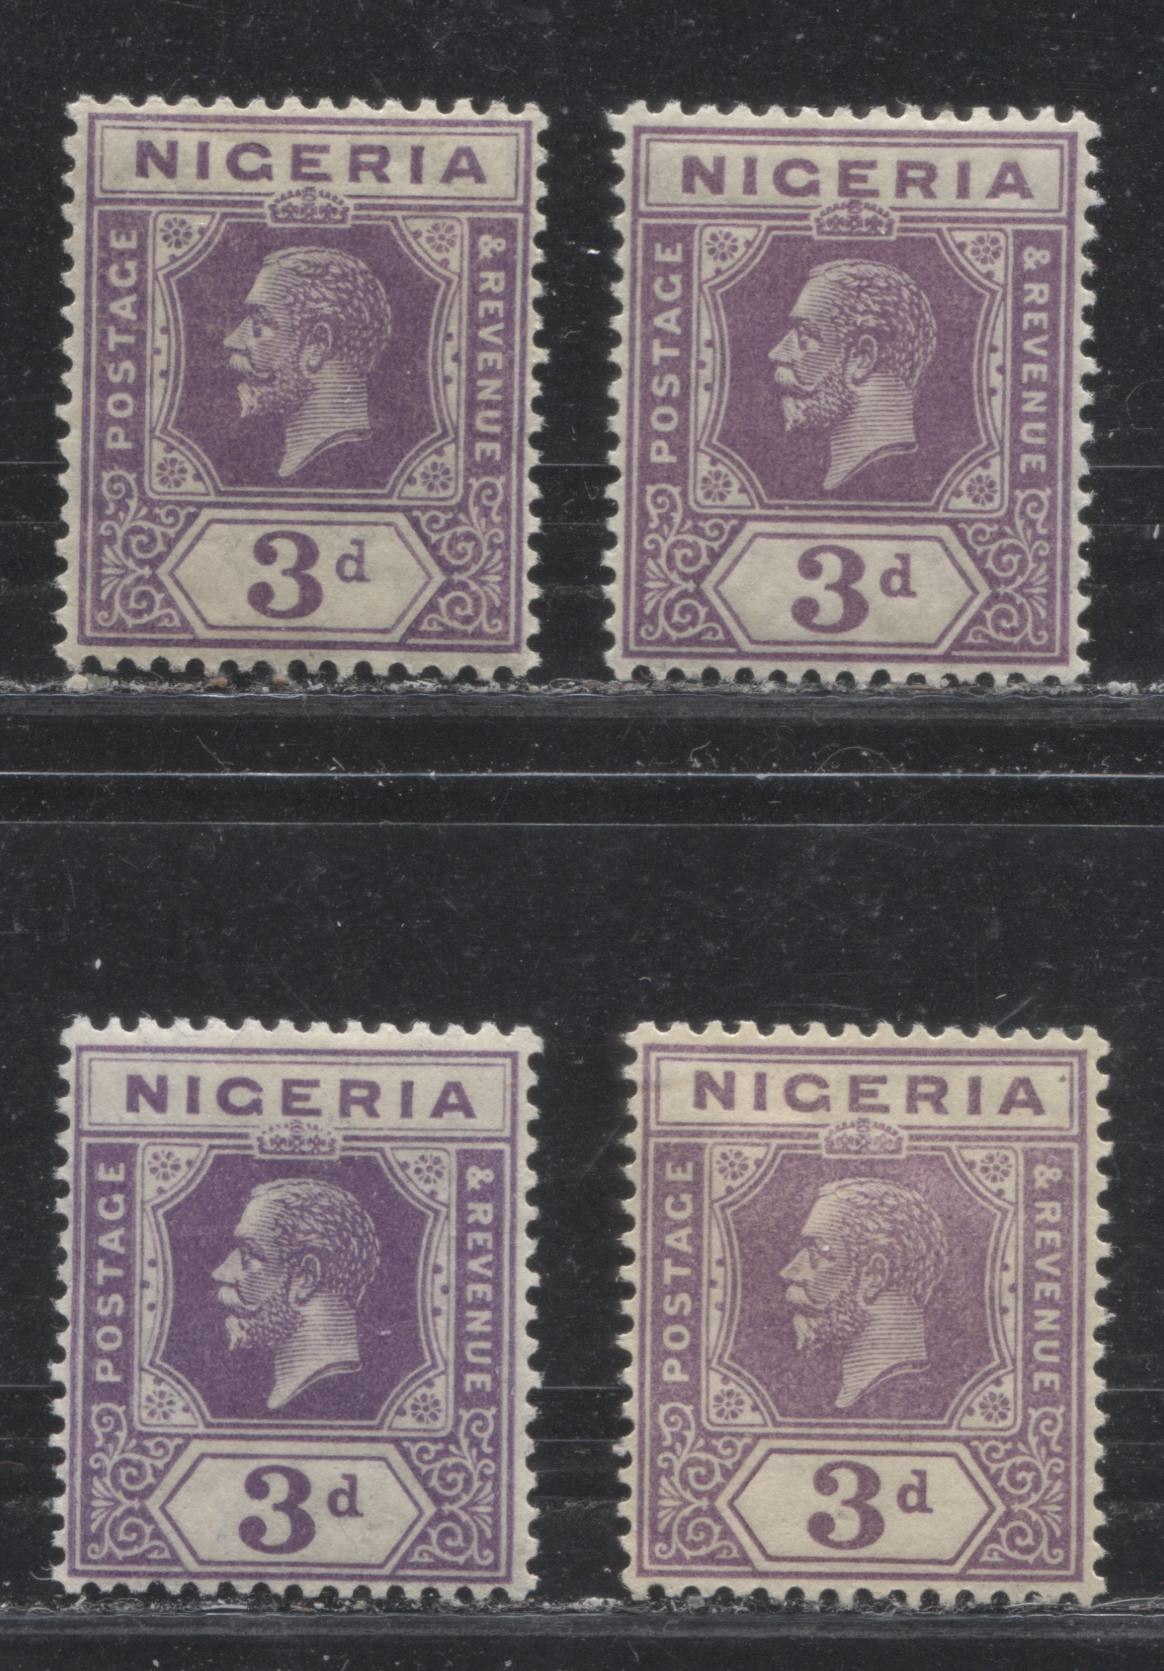 Lot 245 Nigeria SG# 22a 3d Purple & Violet King George V, 1921-1932 Multiple Script CA Imperium Keyplate Issue, Four VFOG Examples, Dies 1 and 2, All From Different Printings, With Different Head and Duty Plate Shades